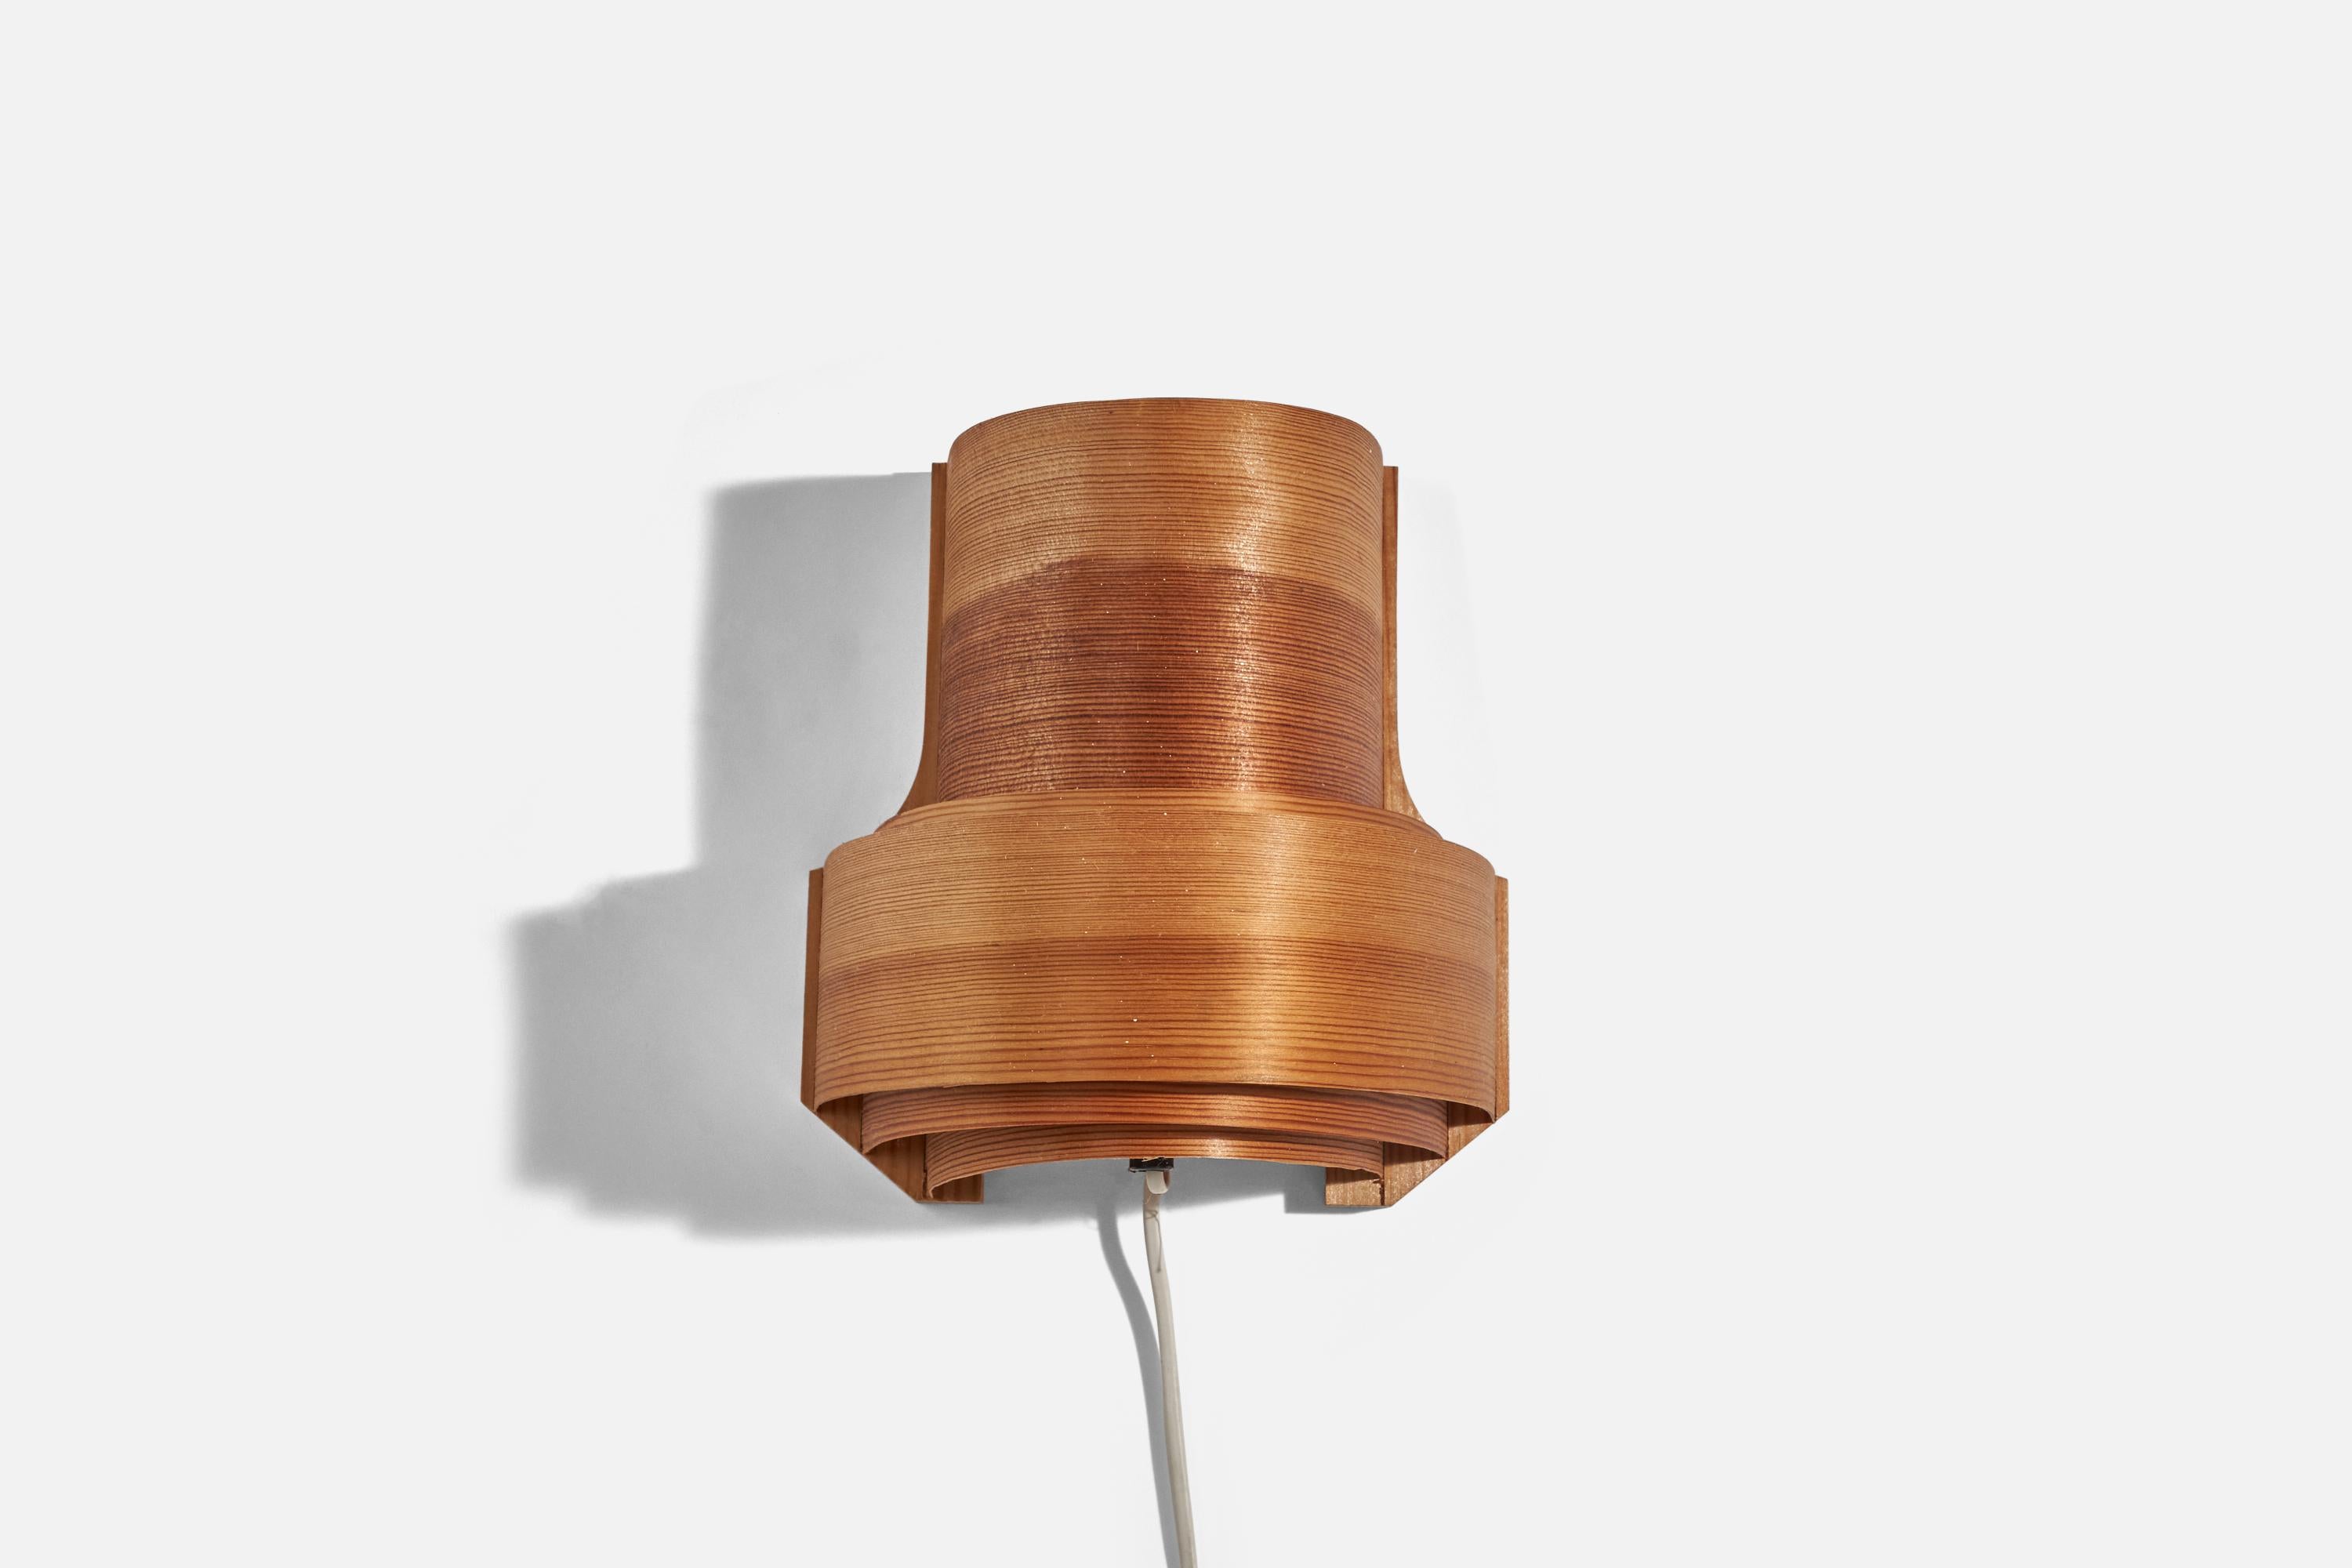 A pair of pine and moulded pine veneer wall lights designed and produced in Denmark, c. 1970s. 

Fixture is not hardwired, plug in only. 

Socket takes standard E-26 medium base bulb.

The maximum wattage stated on the fixture is 60.